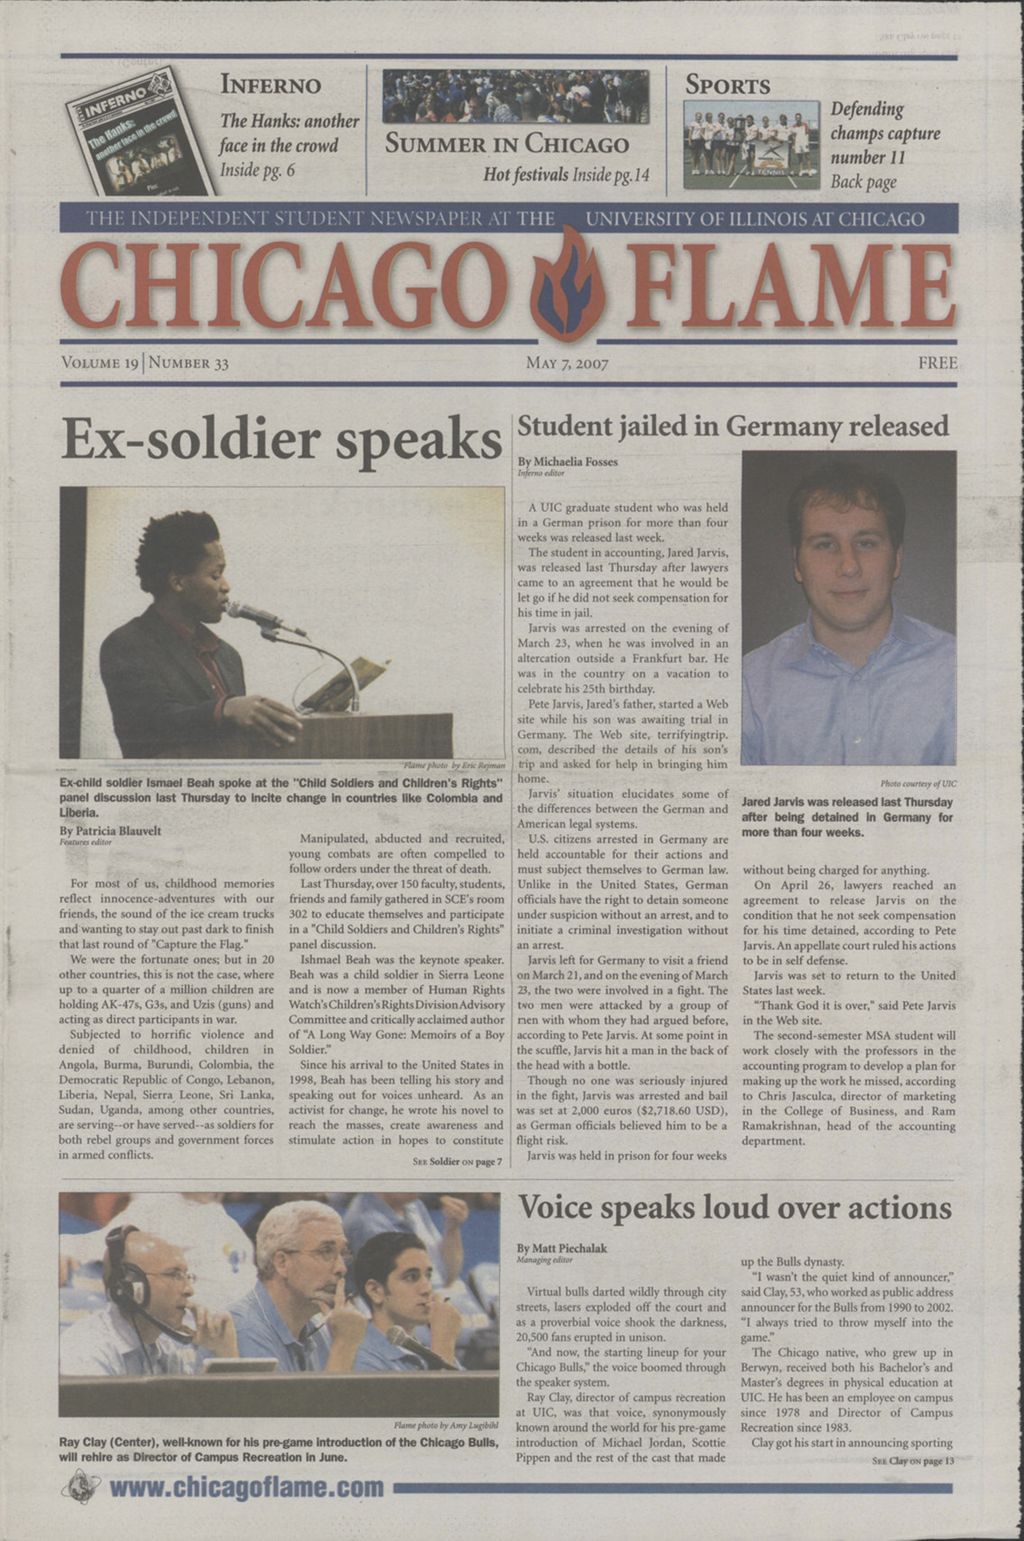 Chicago Flame (May 7, 2007)